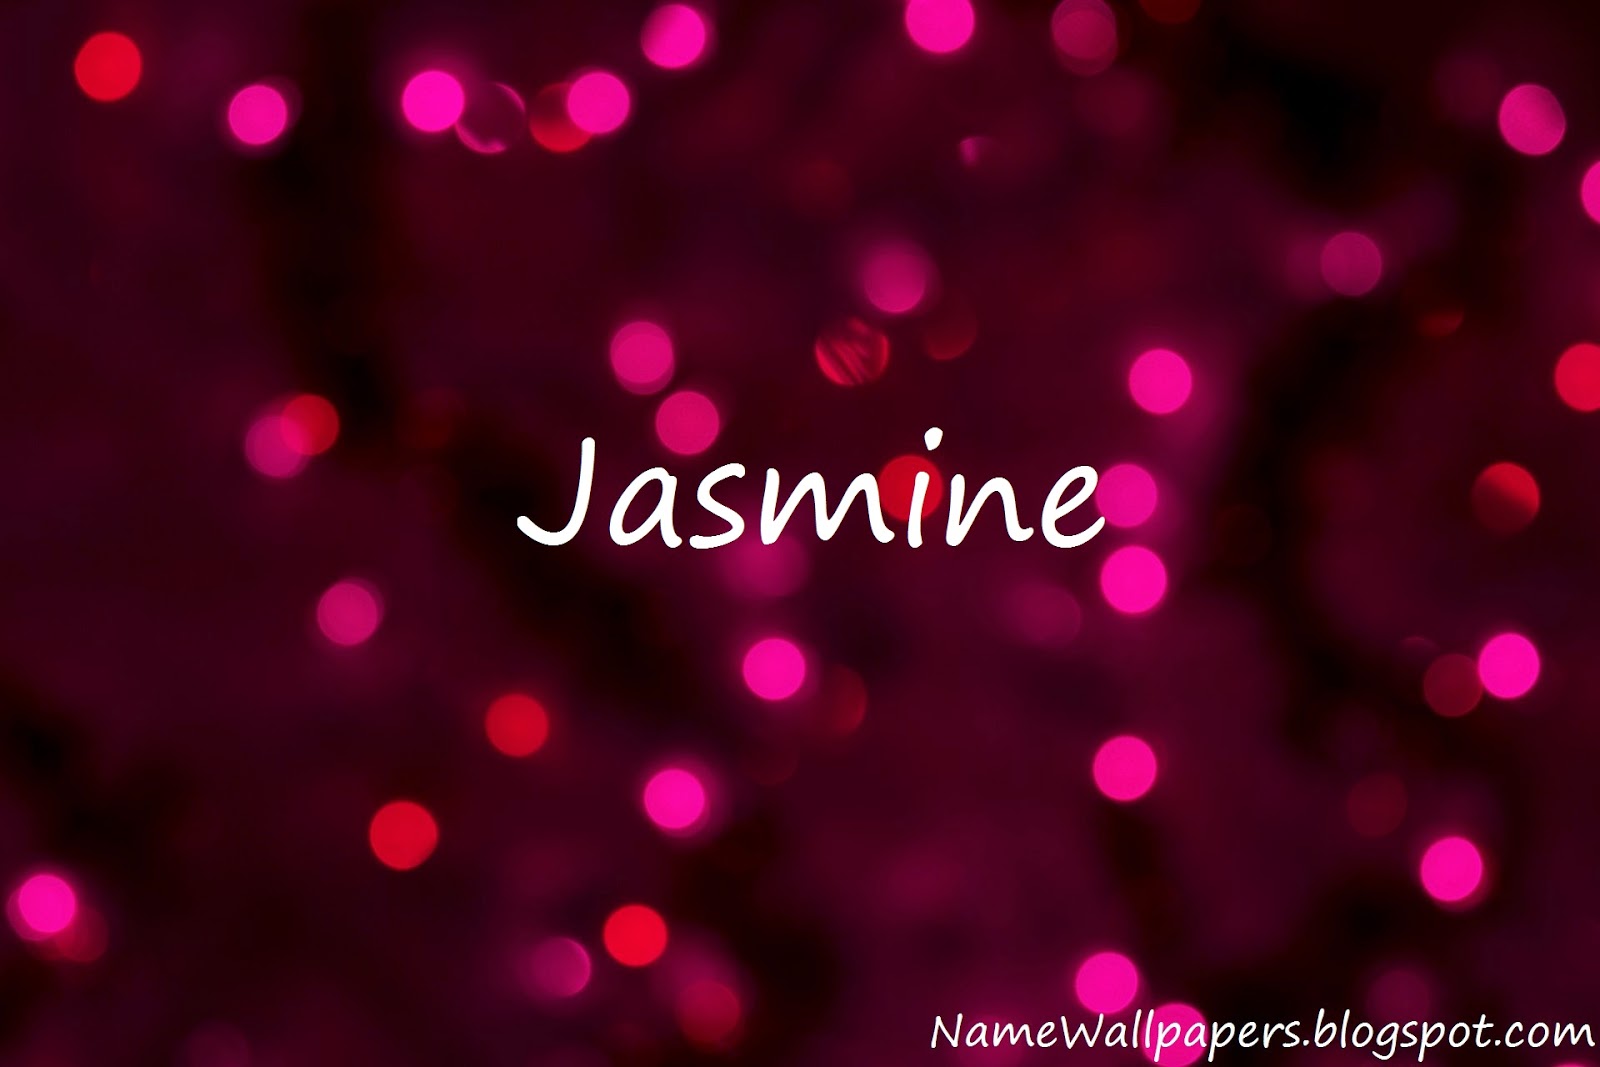 Jasmine Name Wallpapers Jasmine ~ Name Wallpaper Urdu Name Meaning Name 